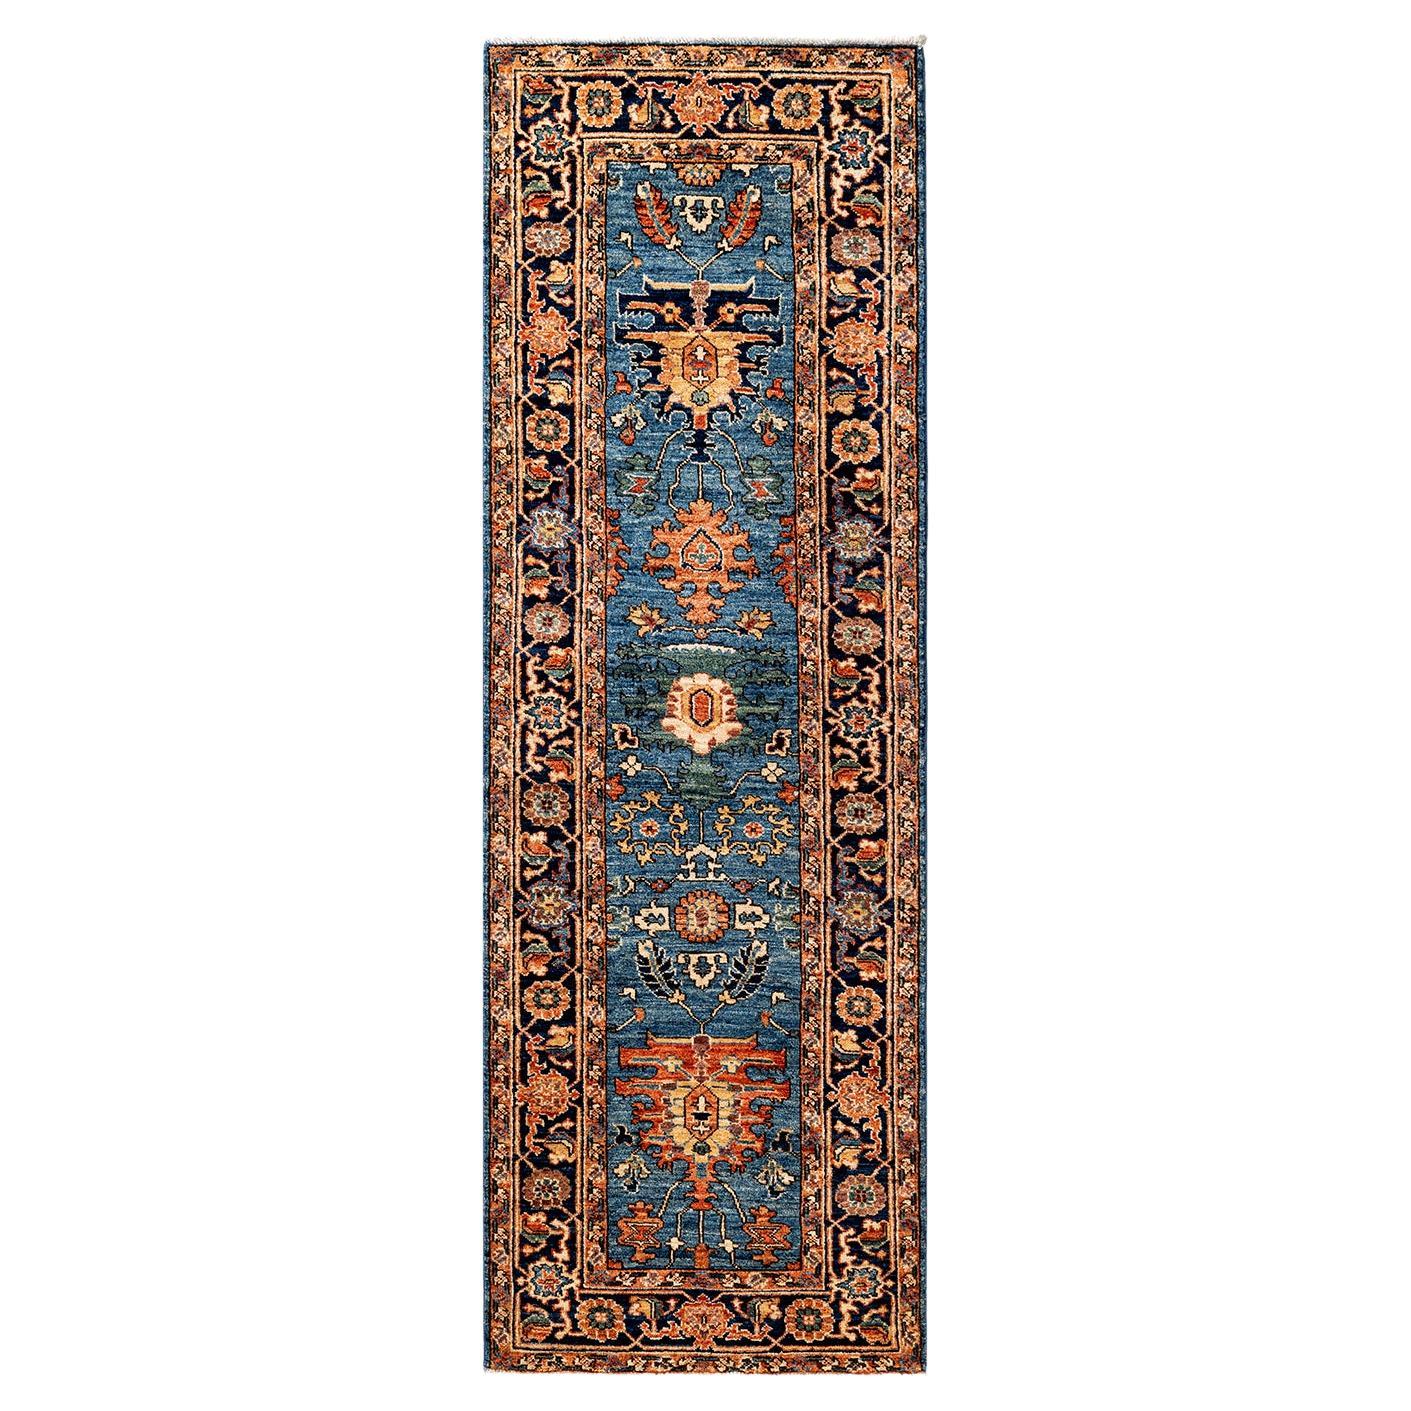 Serapi, One-of-a-Kind Hand-Knotted Runner Rug, Light Blue